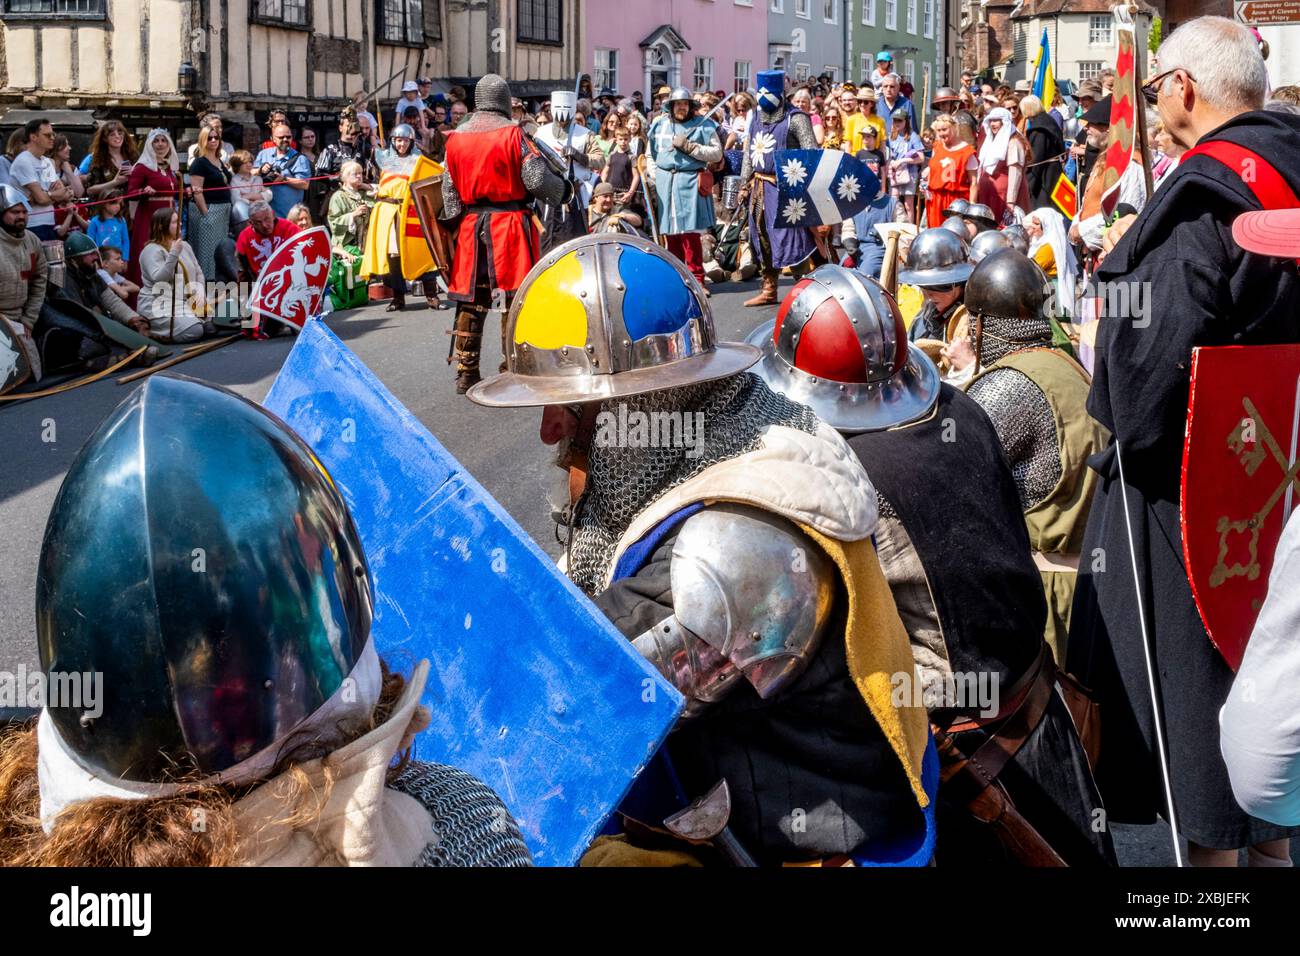 Local People Dressed In Medieval Costume Take Part In The Annual Re-Enactment Of The 13th Century Battle Of Lewes, Lewes, East Sussex, UK. Stock Photo